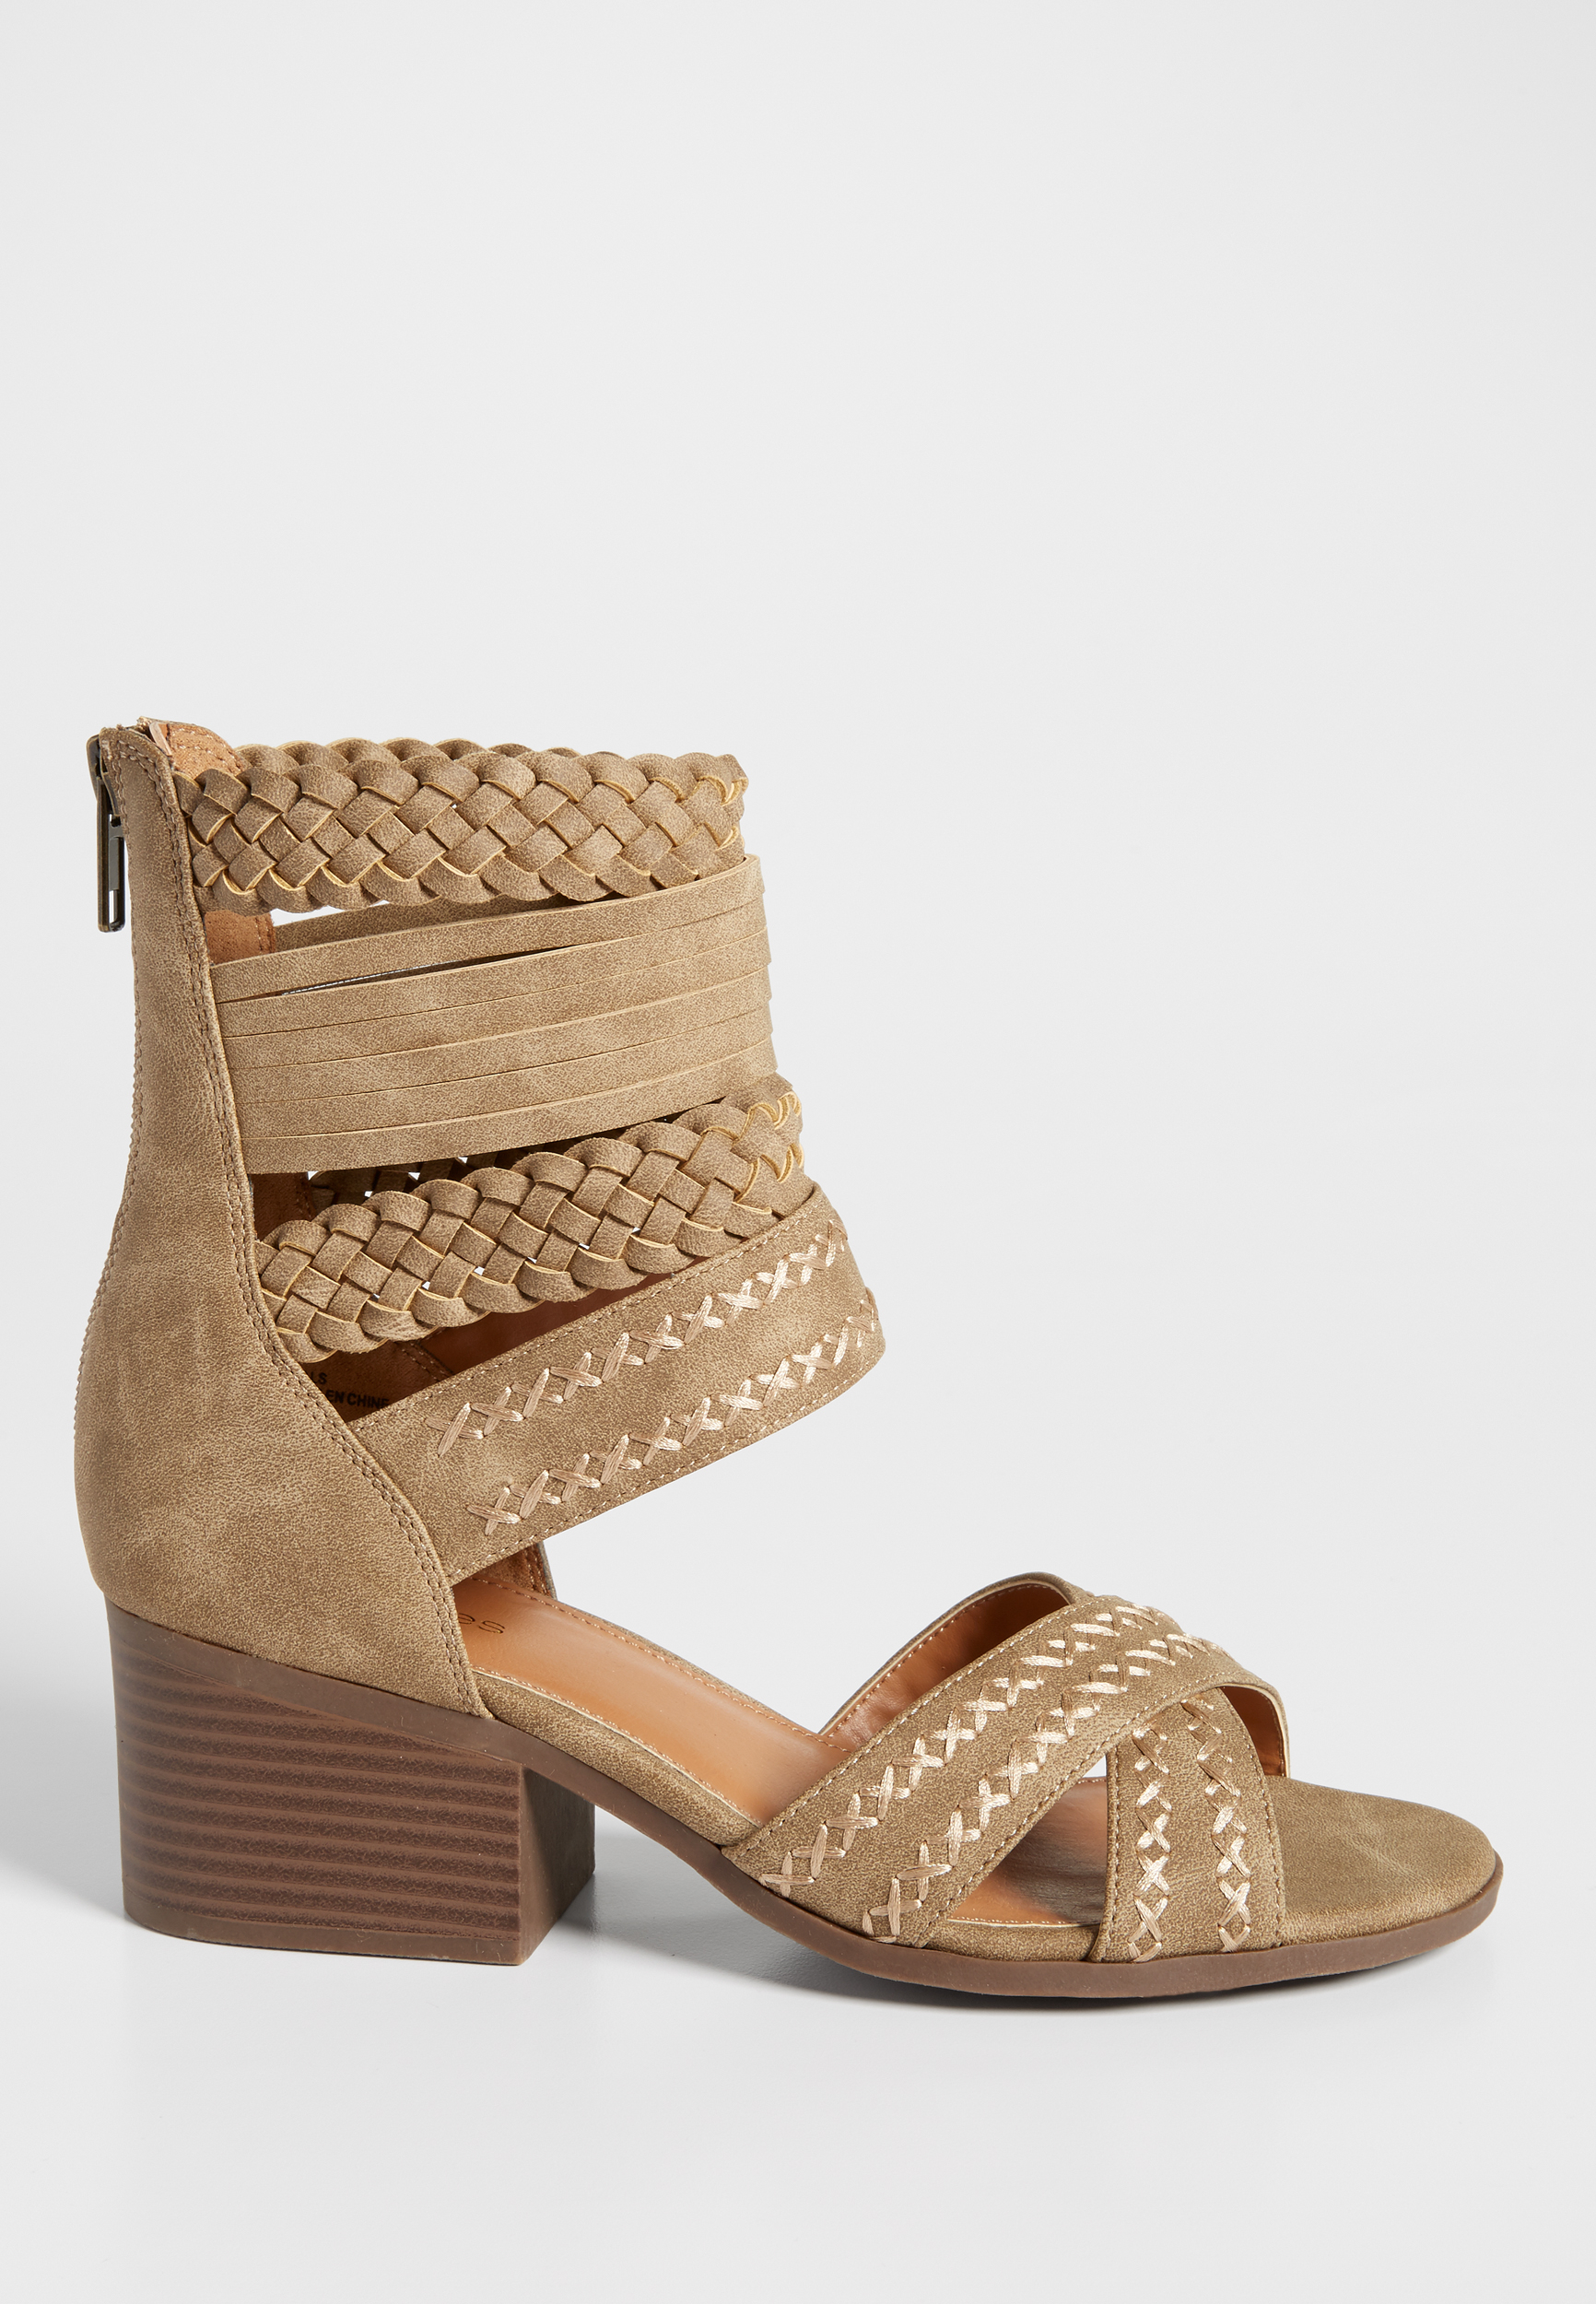 Erin faux leather heel with woven and cross stitched straps | maurices